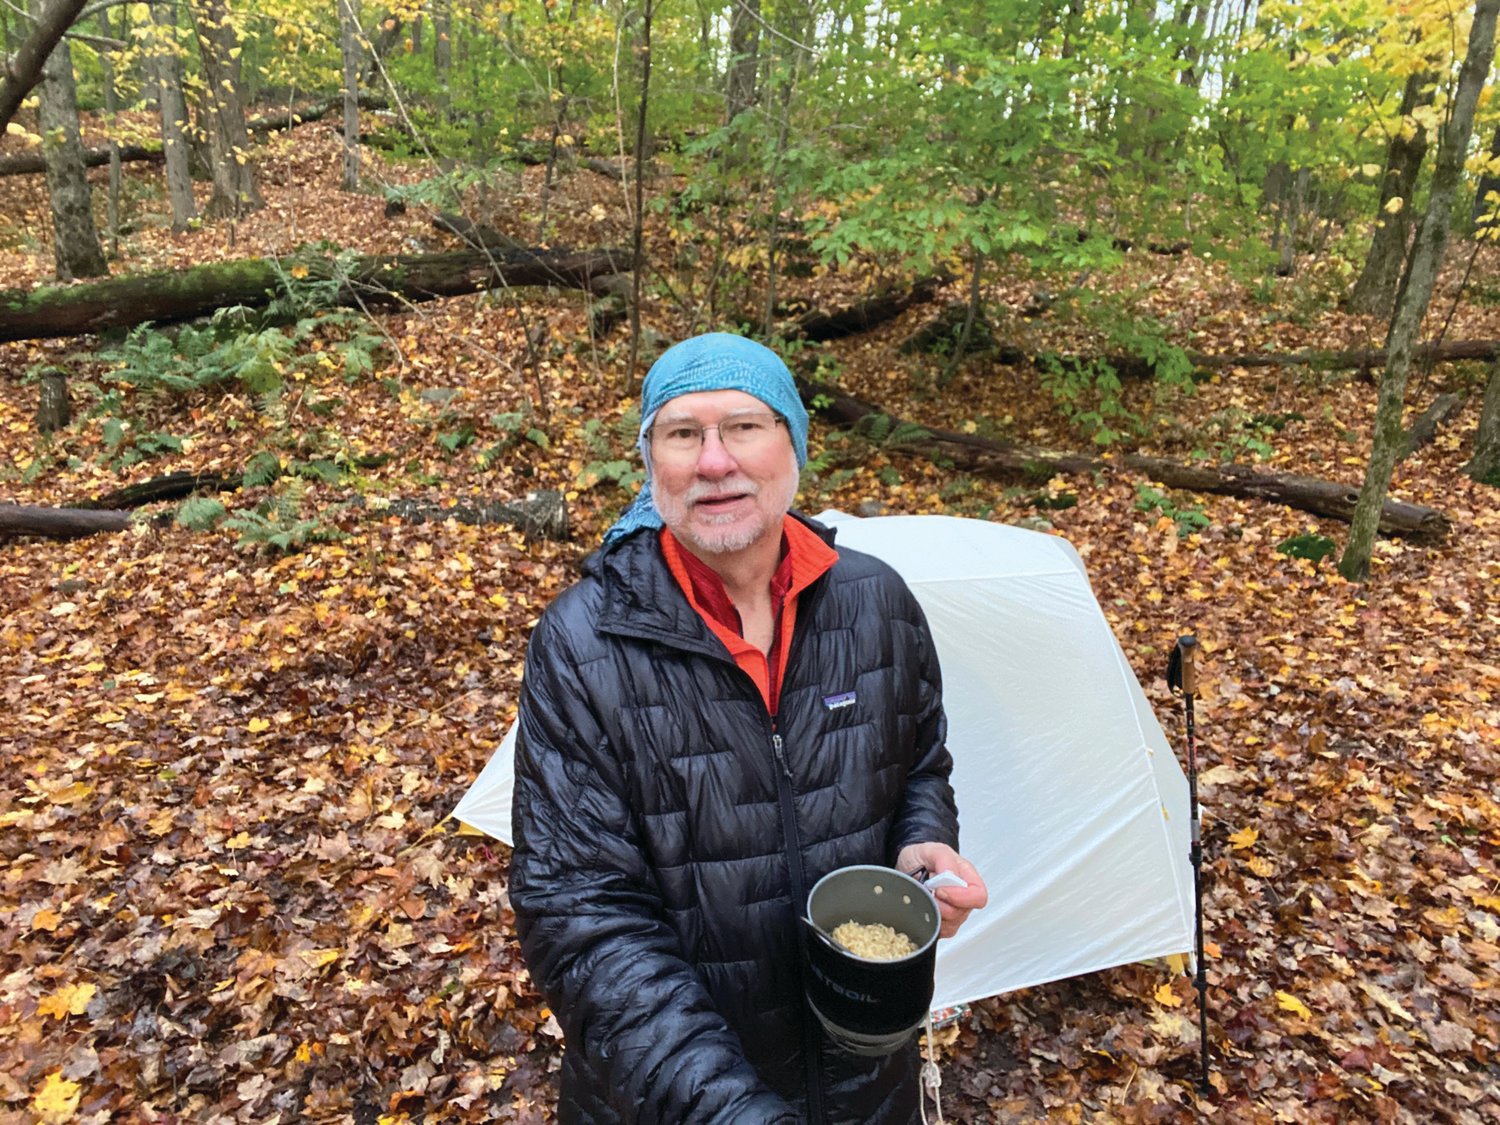 Boblitt at his campsite on a previous hike.